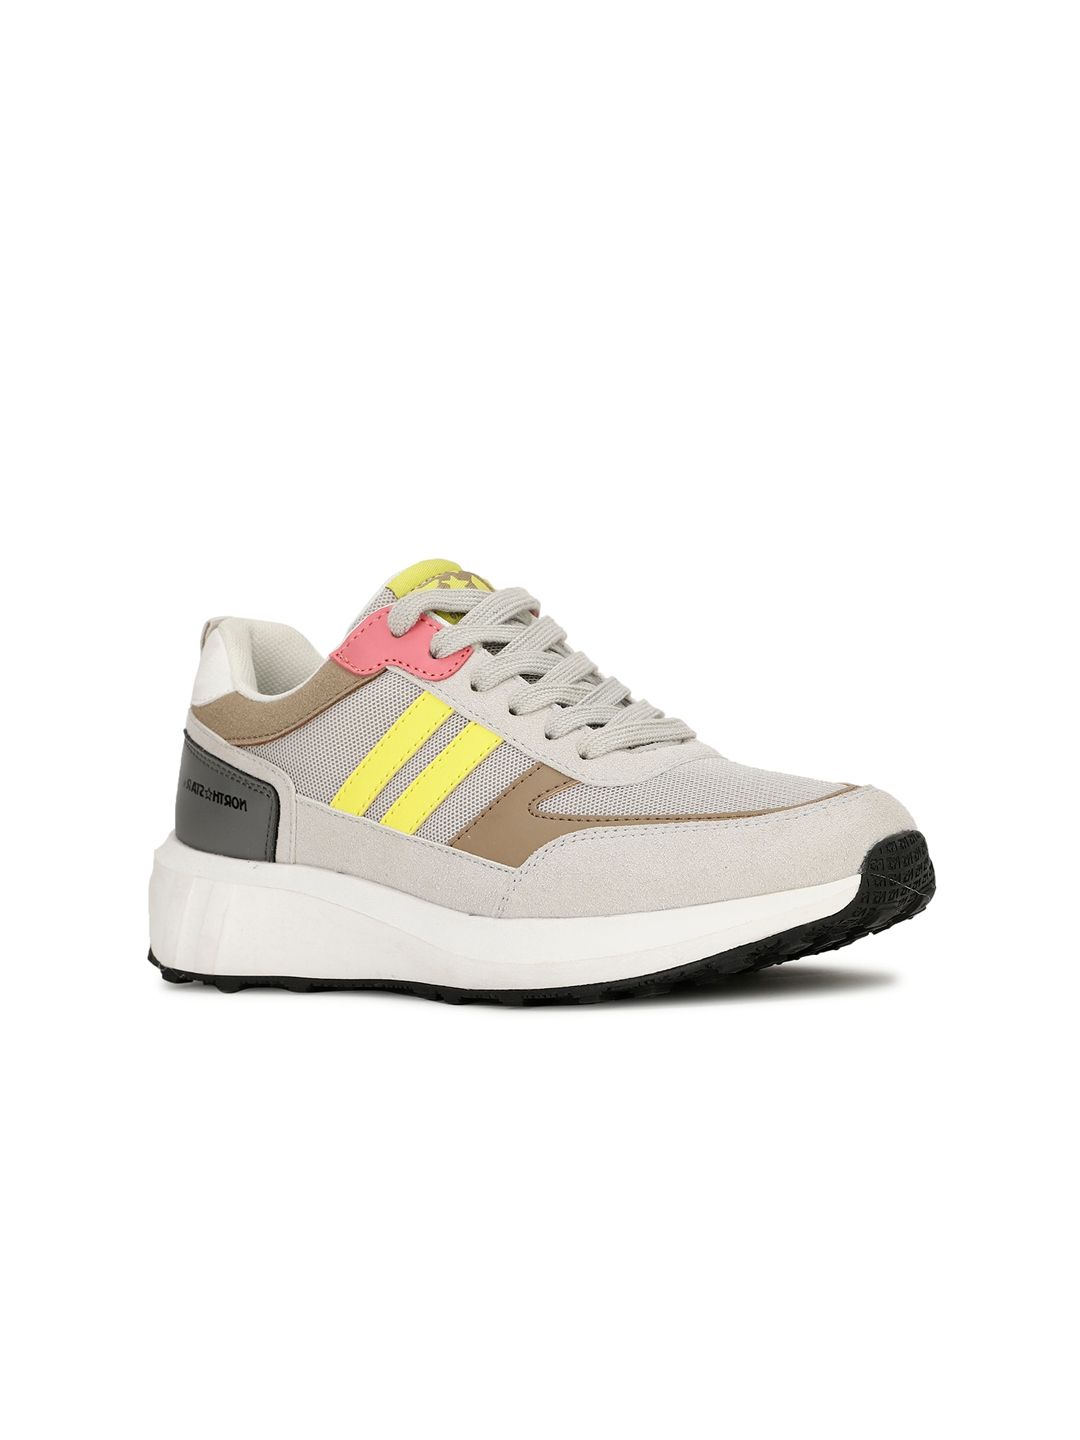 North Star Women Colourblocked PU Sneakers Price in India